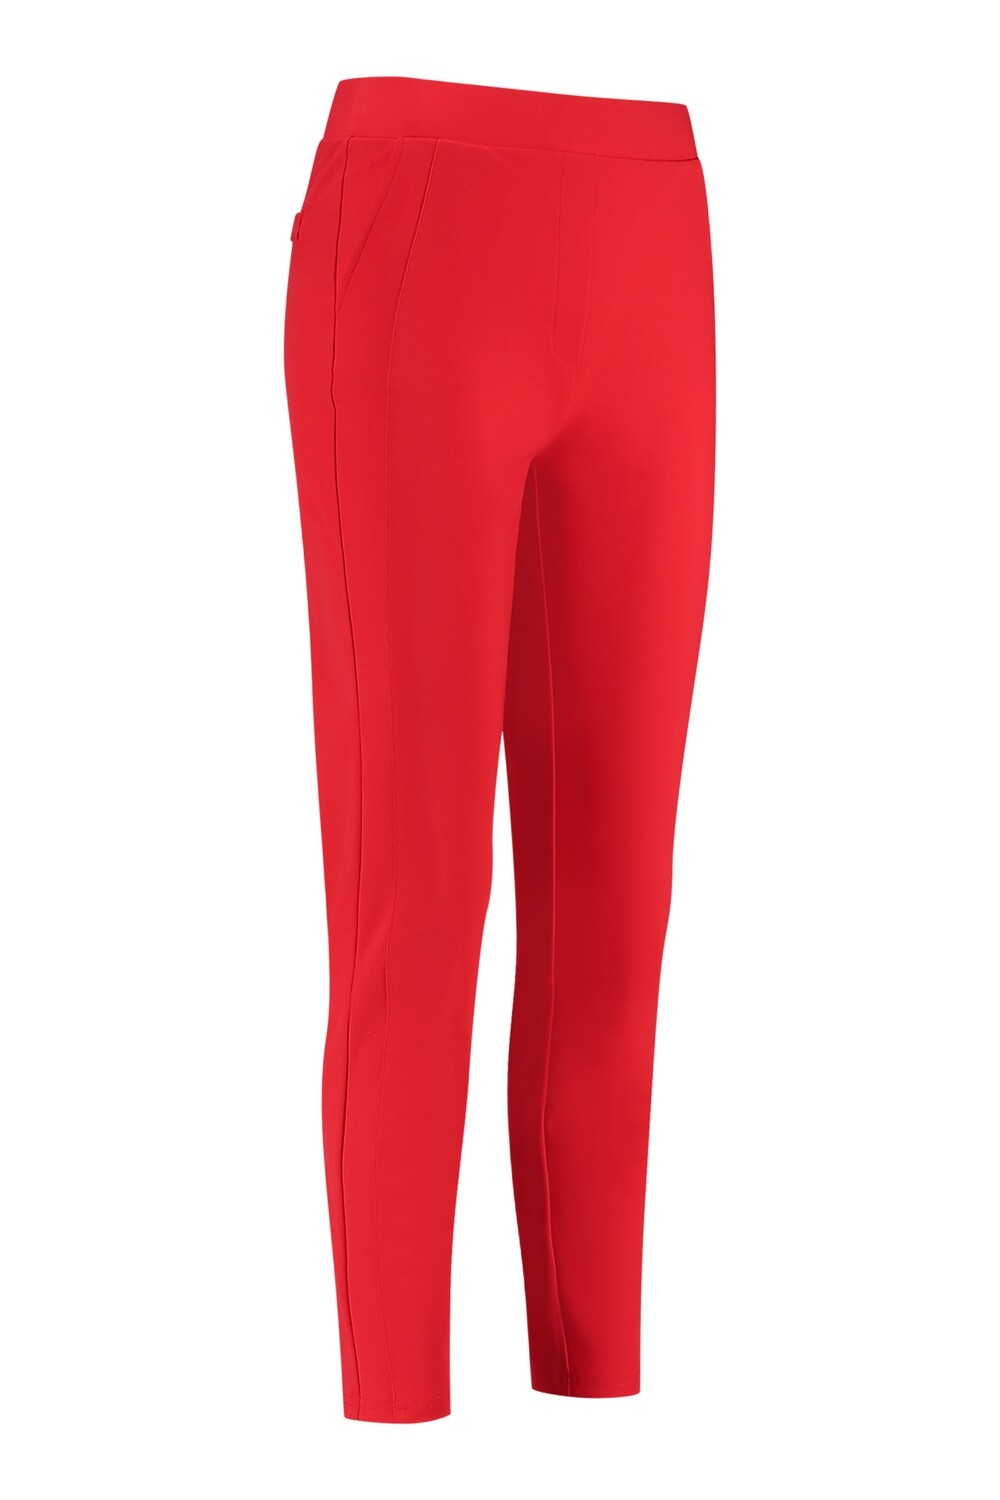 Studio Anneloes Blair bonded trousers, Red